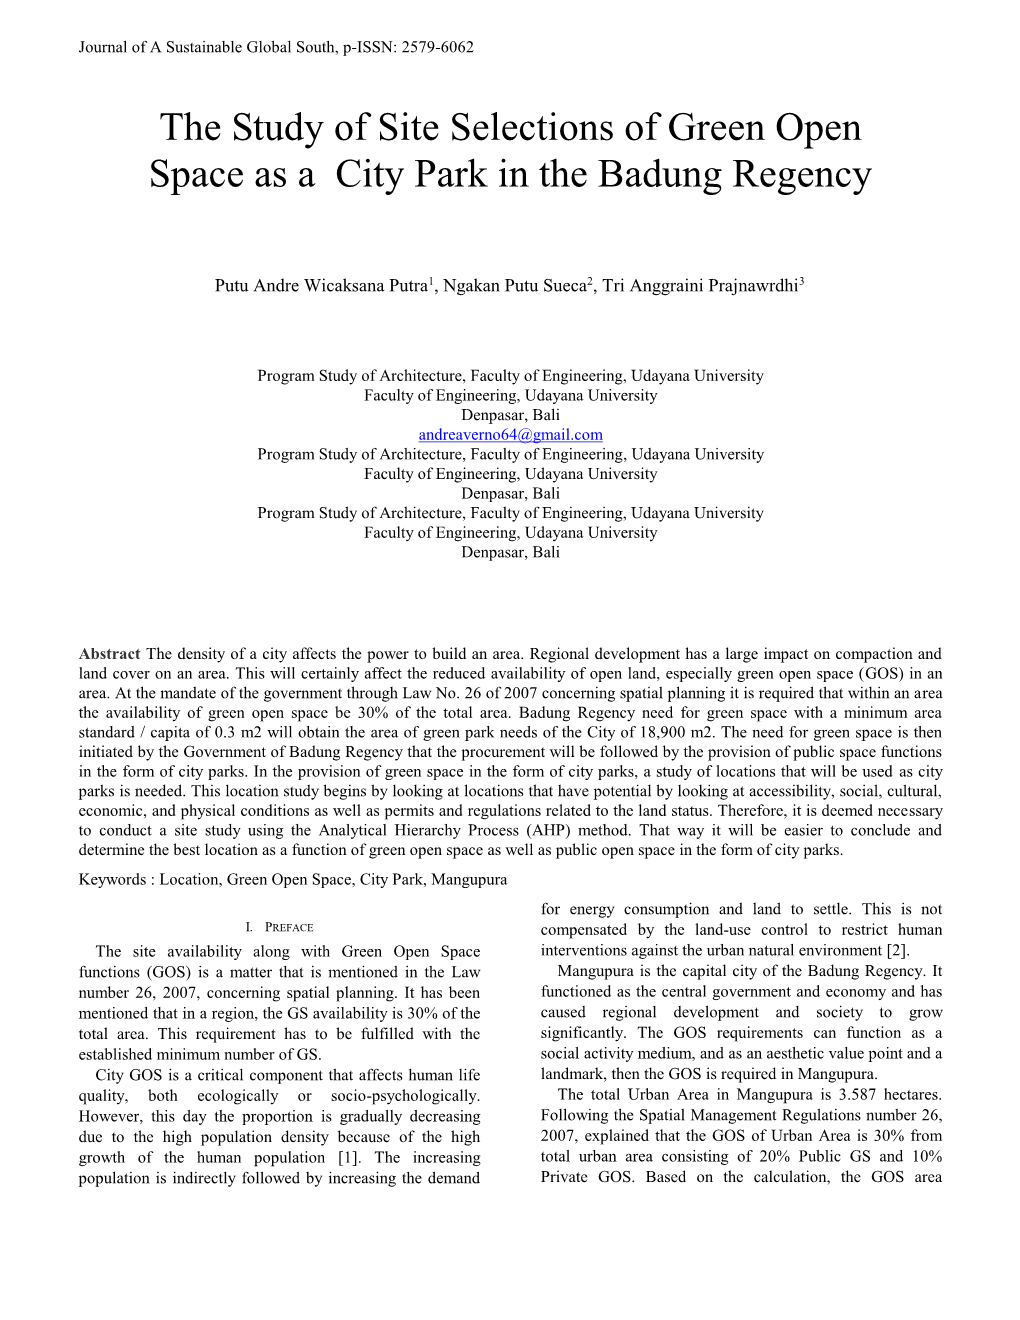 The Study of Site Selections of Green Open Space As a City Park in the Badung Regency